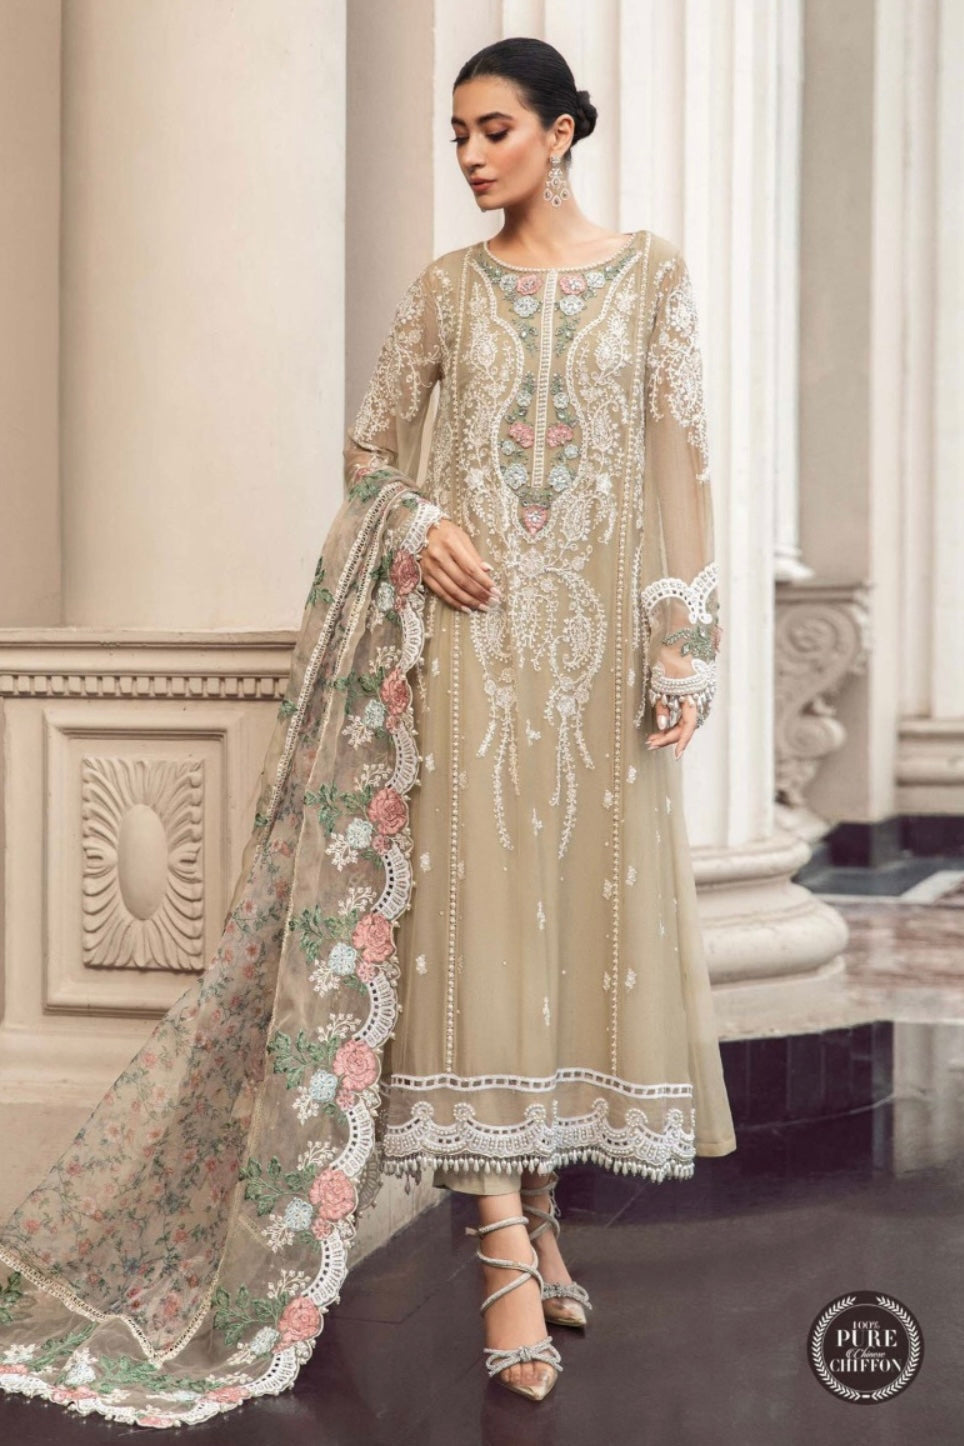 SIMRANS Maria b inspired 3 piece Chiffon embroidered beige suit MB3814-BEIGE